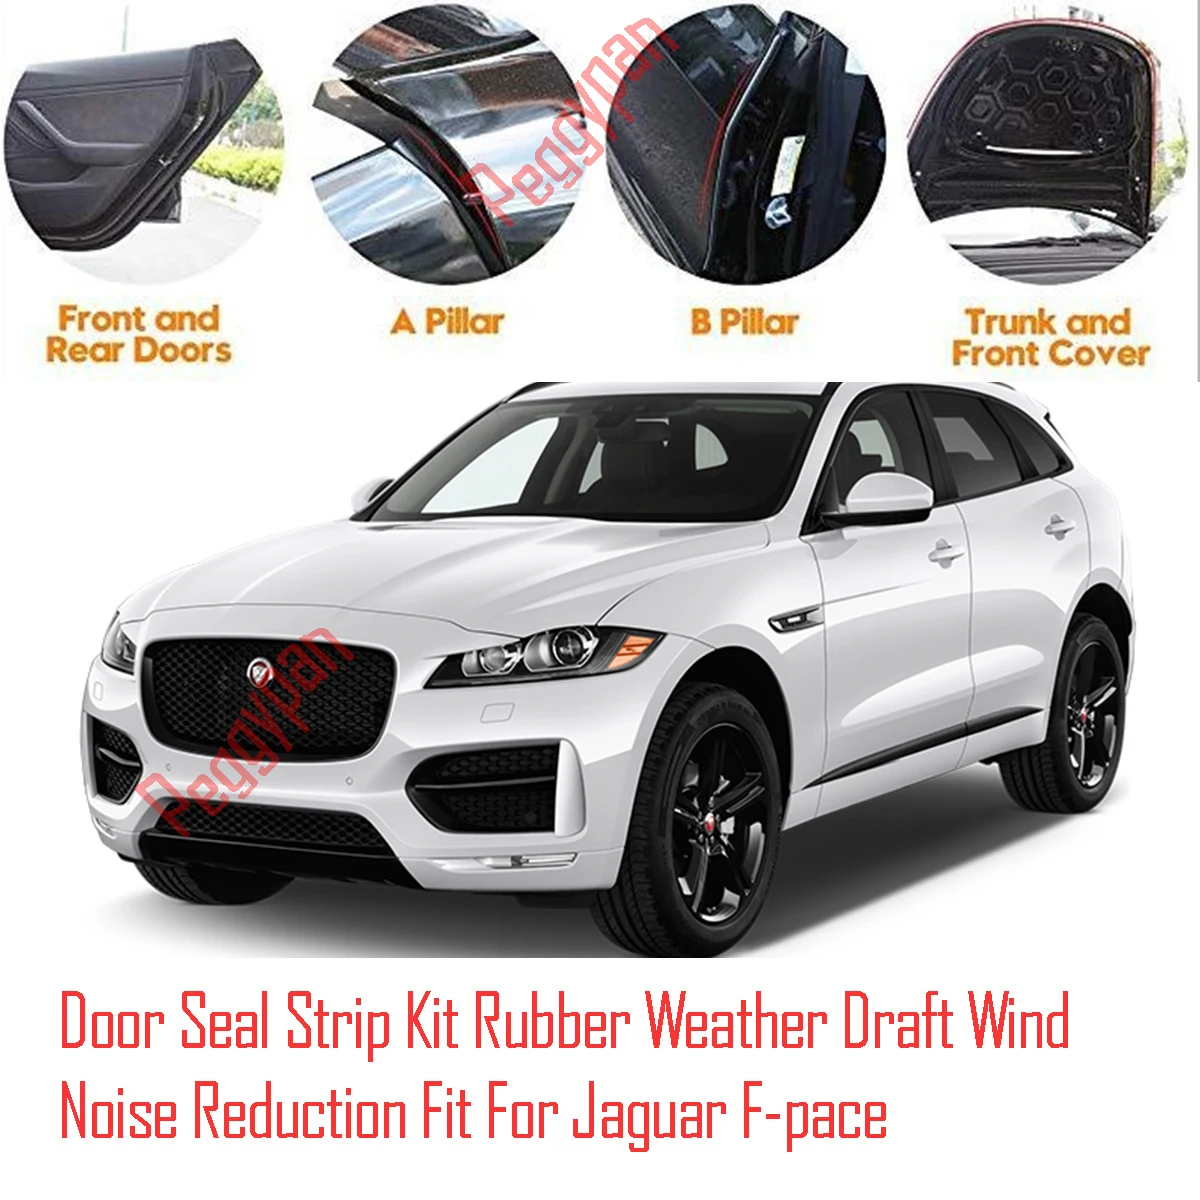 Door Seal Strip Kit Self Adhesive Window Engine Cover Soundproof Rubber Weather Draft Wind Noise Reduction Fit For Jaguar F-pace